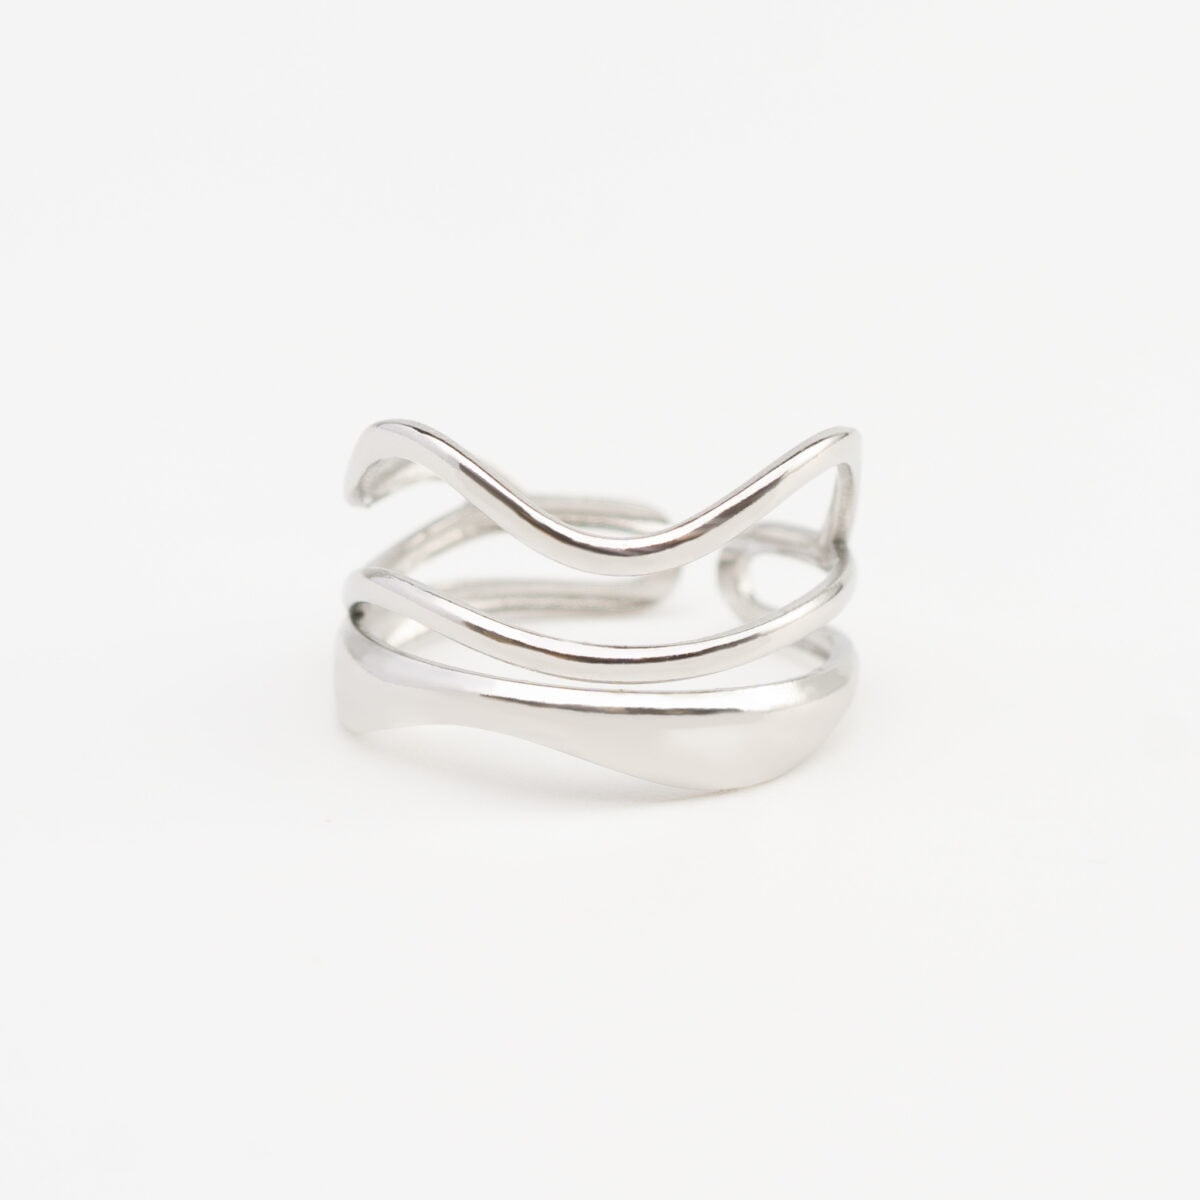 https://m.clubbella.co/product/aura-spiral-ring/ Aura Spiral Ring (2)